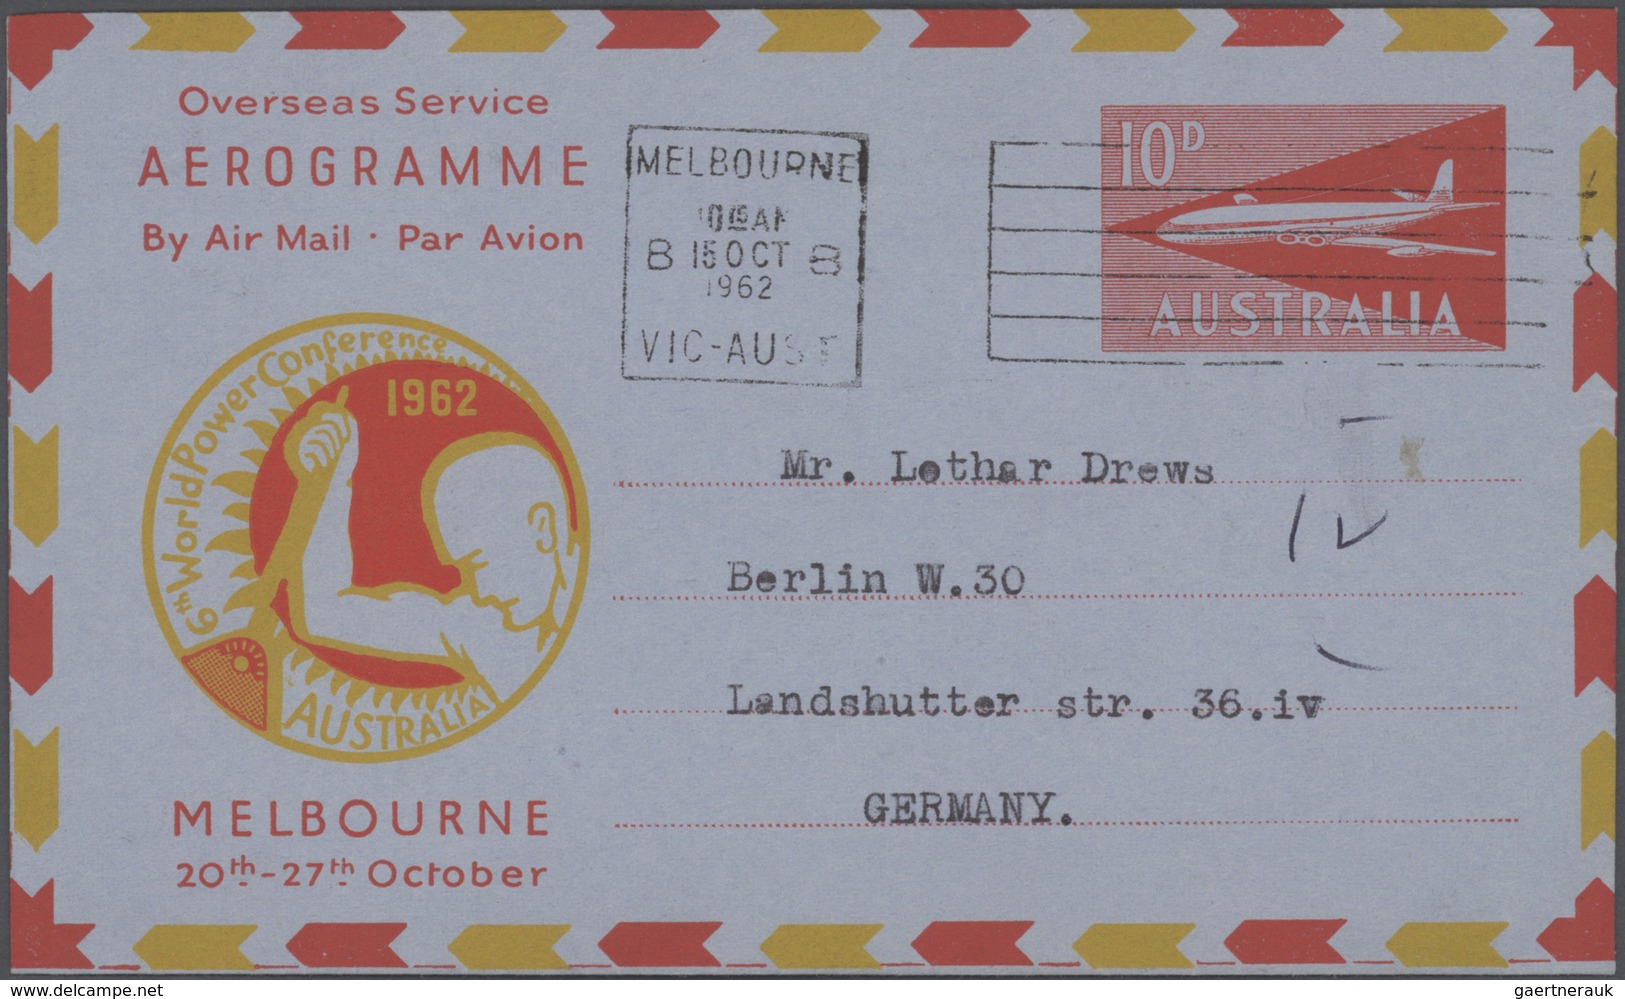 Australien: 1916/1965 (ca.), accumulation with about 320 covers incl. several FDC’s and some postal